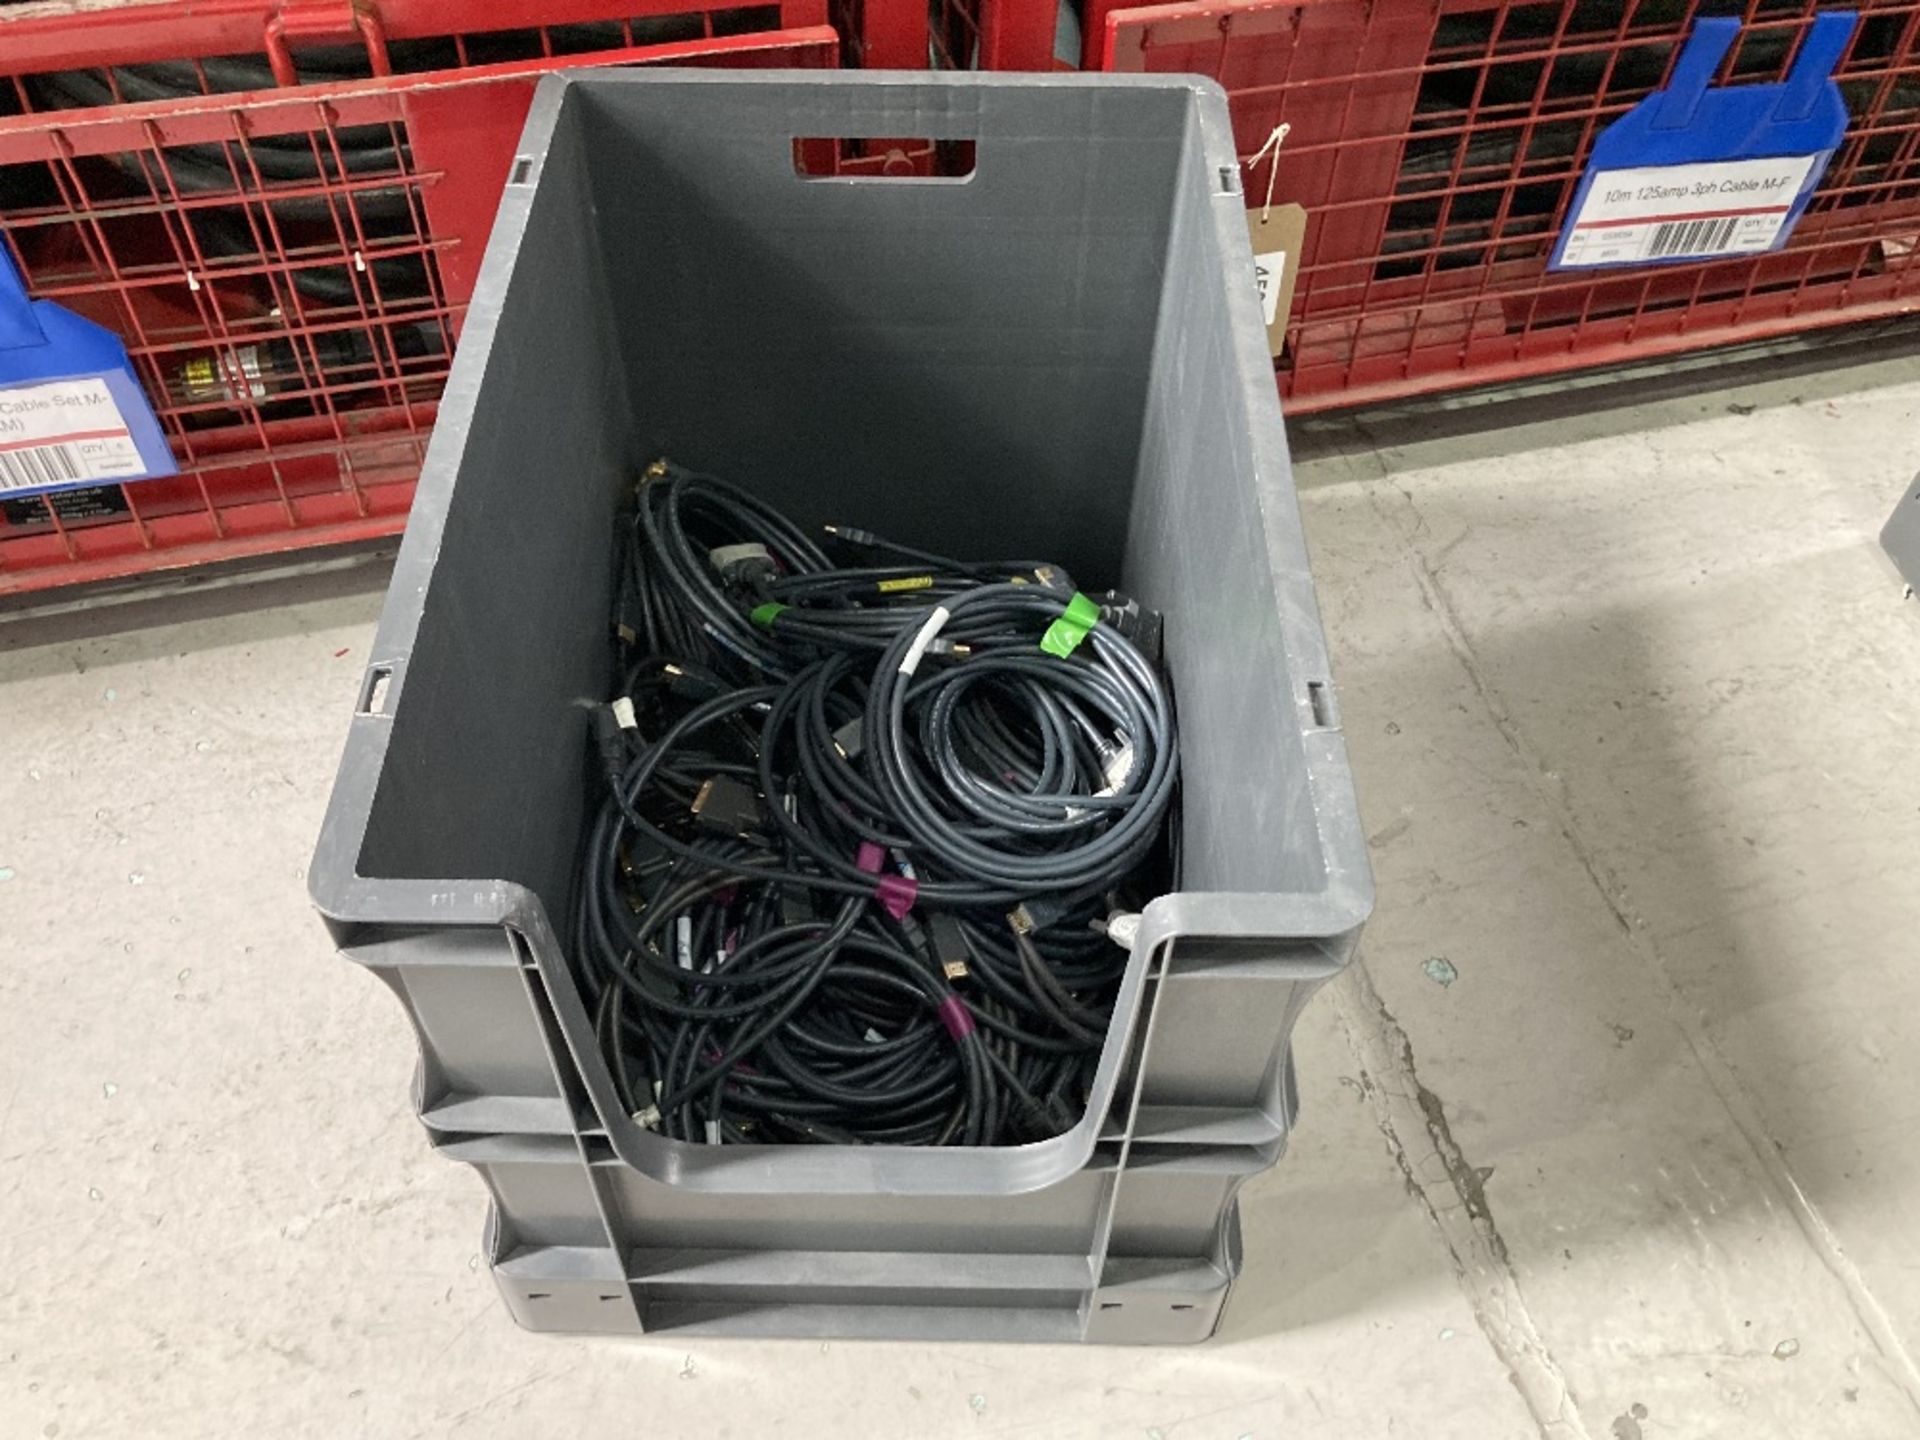 Quantity Of HDMI/Visual Cables With Plastic Lin Bin